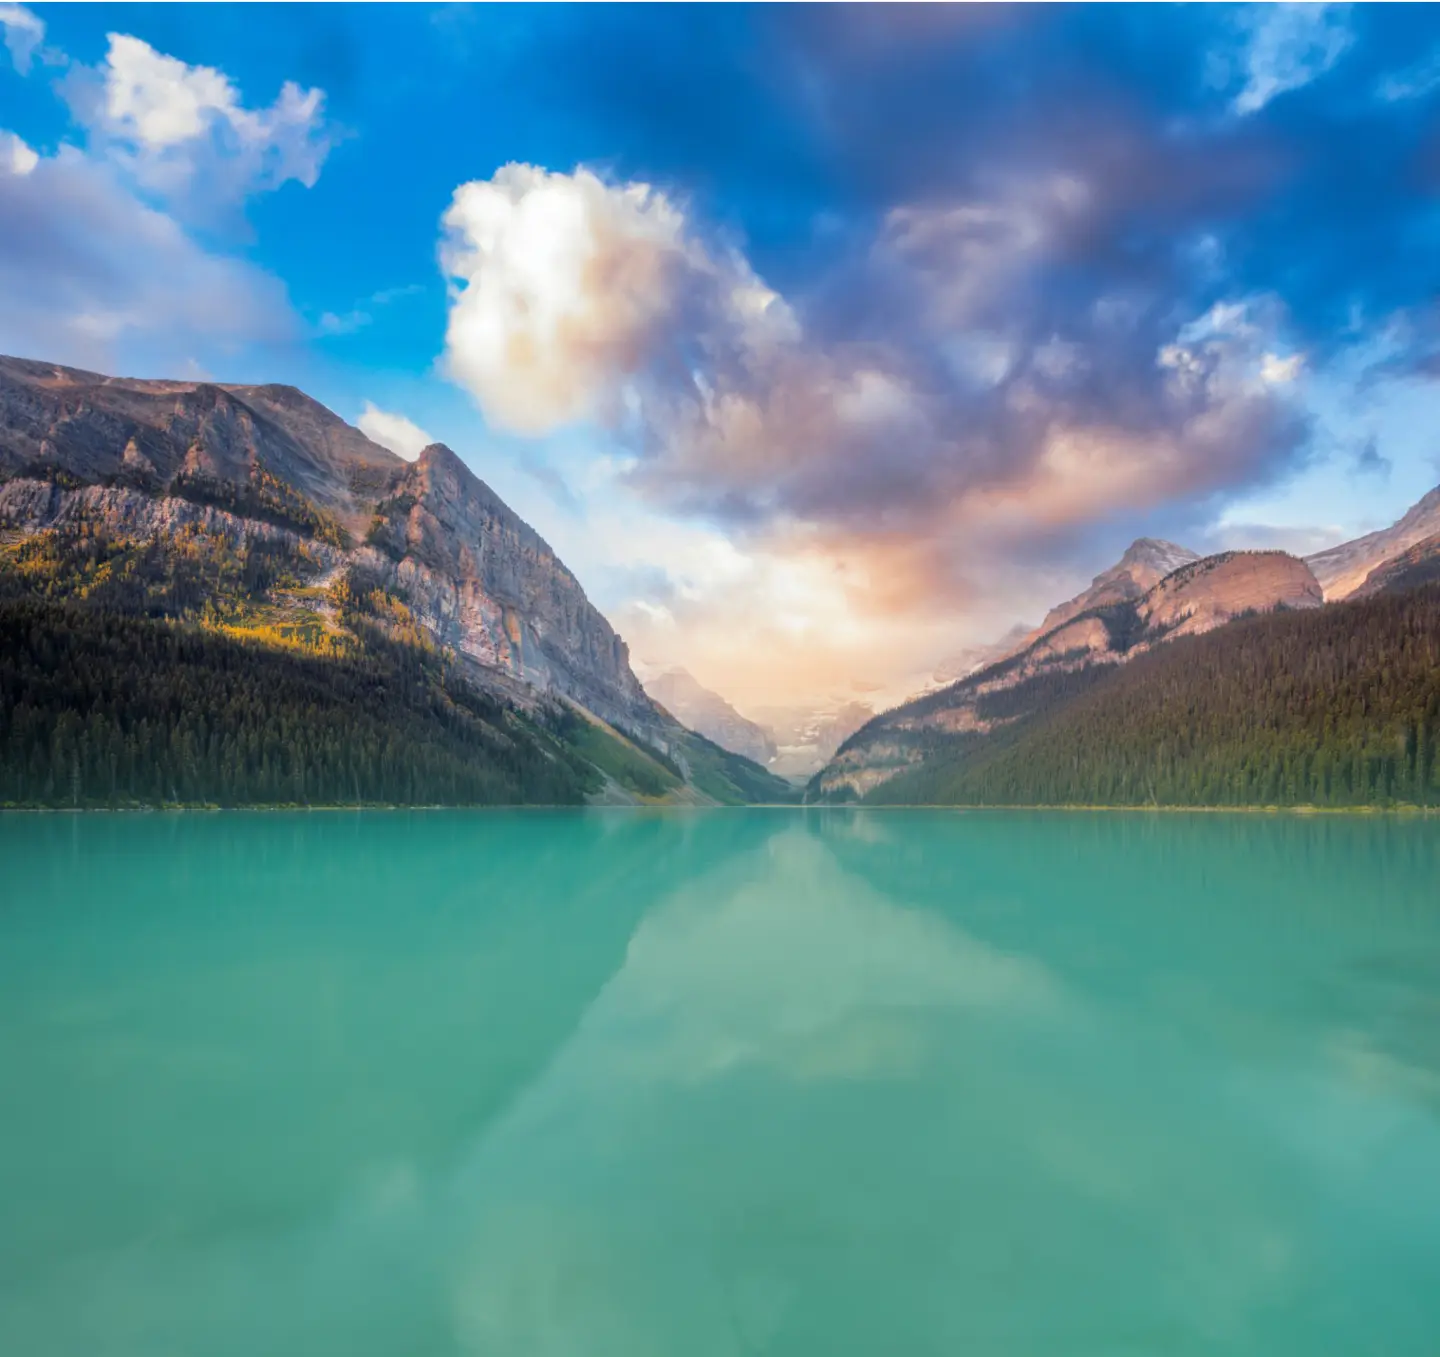 Majestic view of Lake Louise in Banff National Park, Alberta, Canada, surrounded by towering snow-capped mountains and vibrant turquoise waters